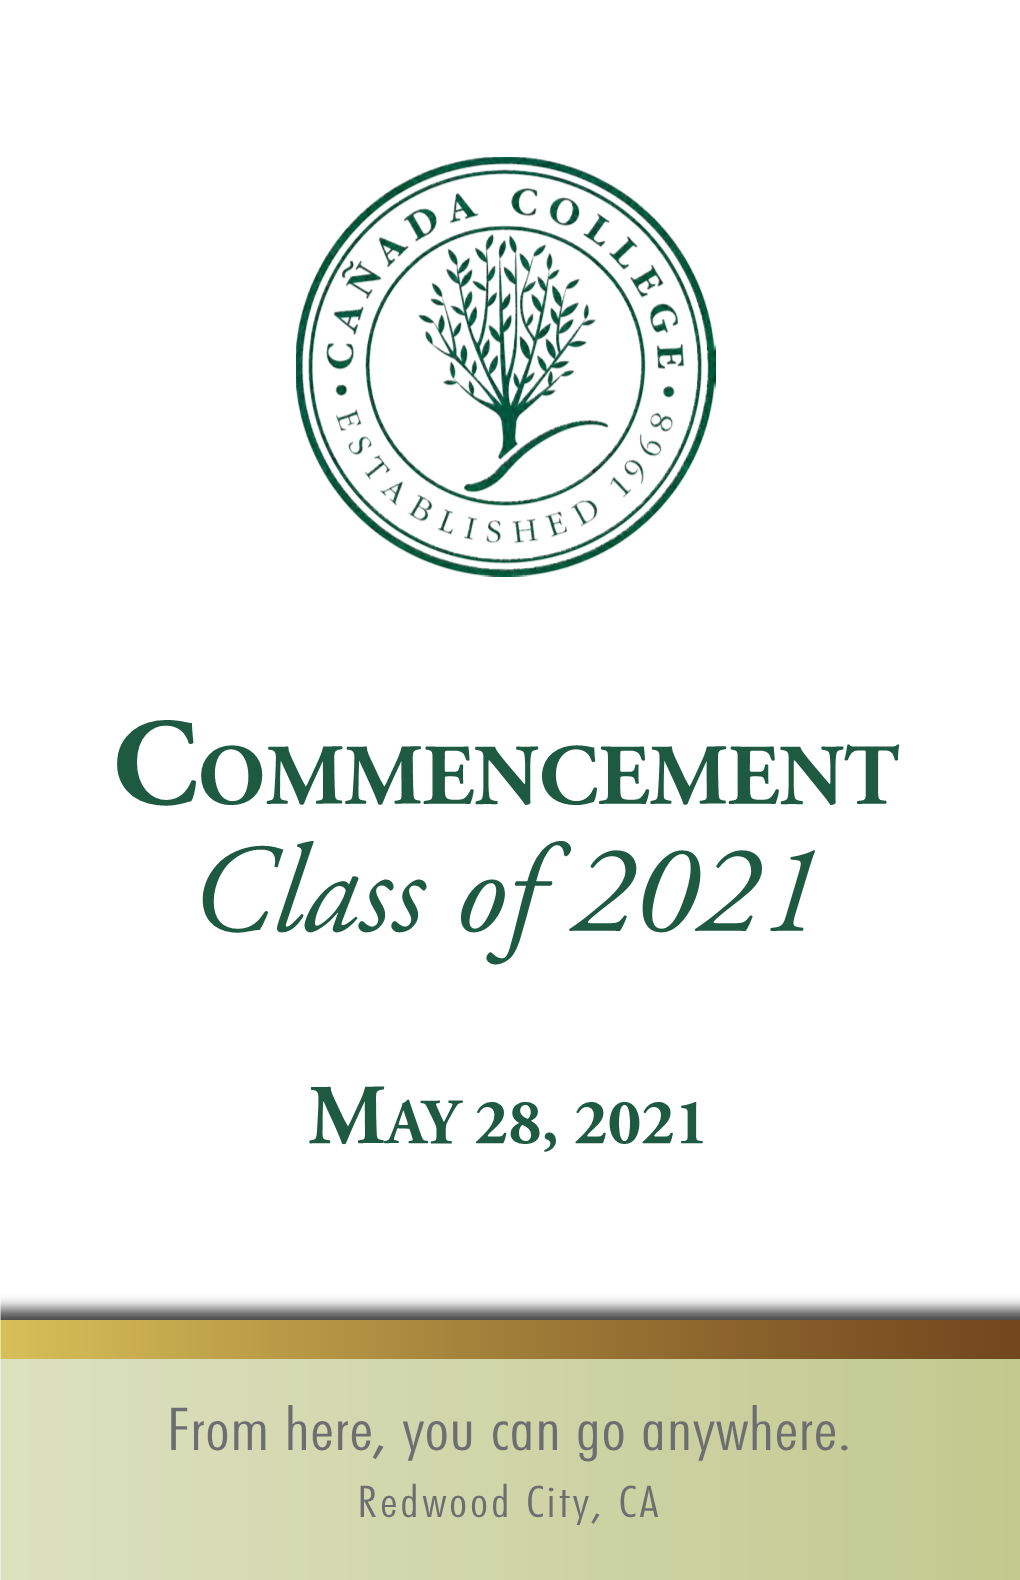 COMMENCEMENT Class of 2021